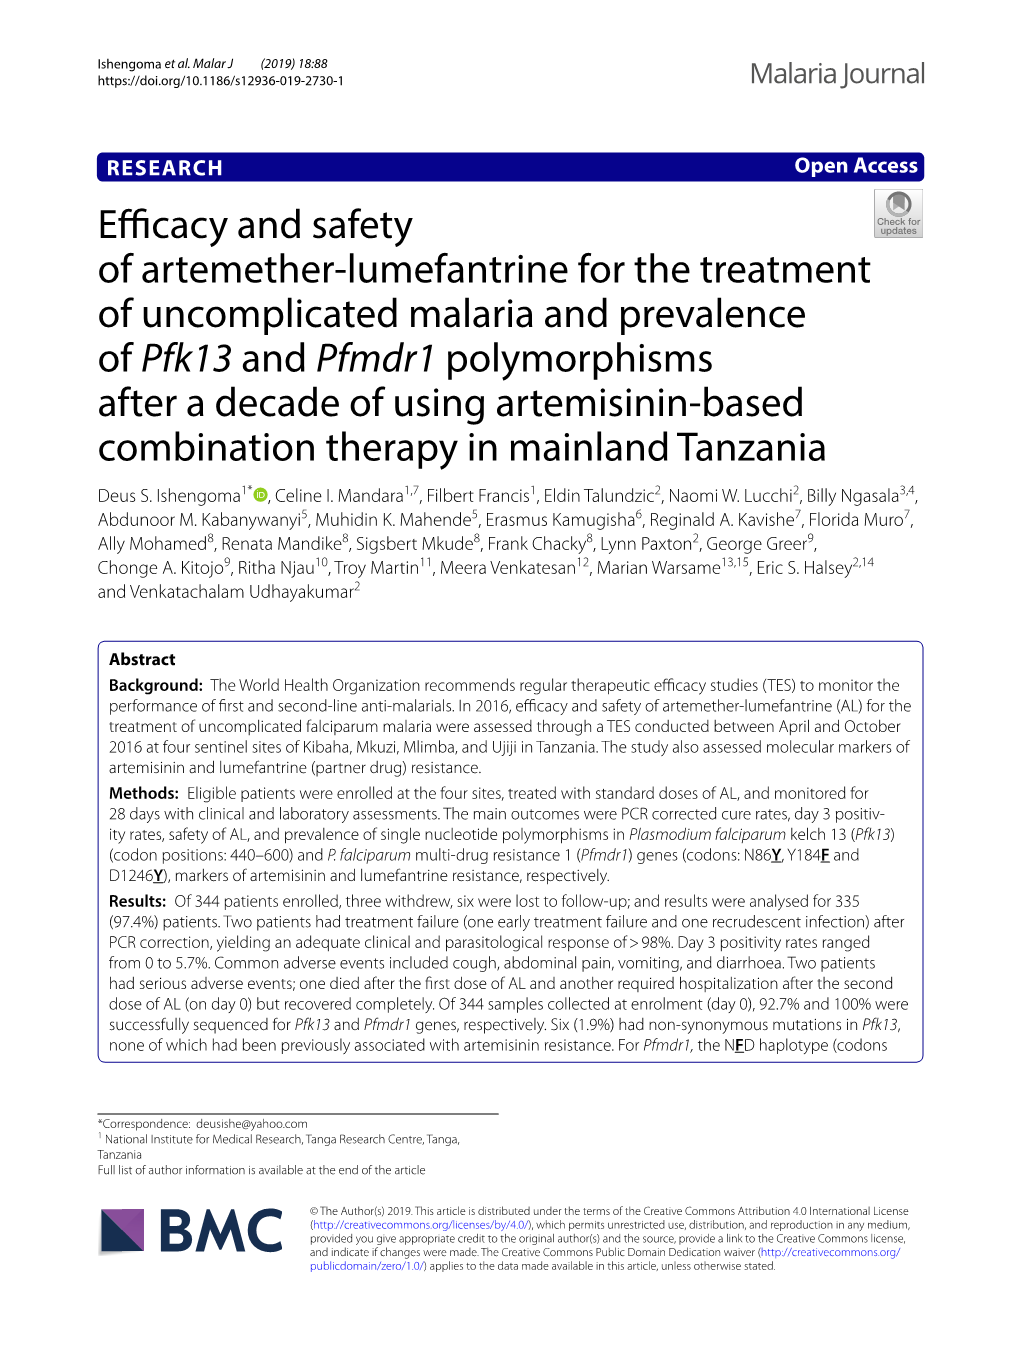 Efficacy and Safety of Artemether-Lumefantrine for The